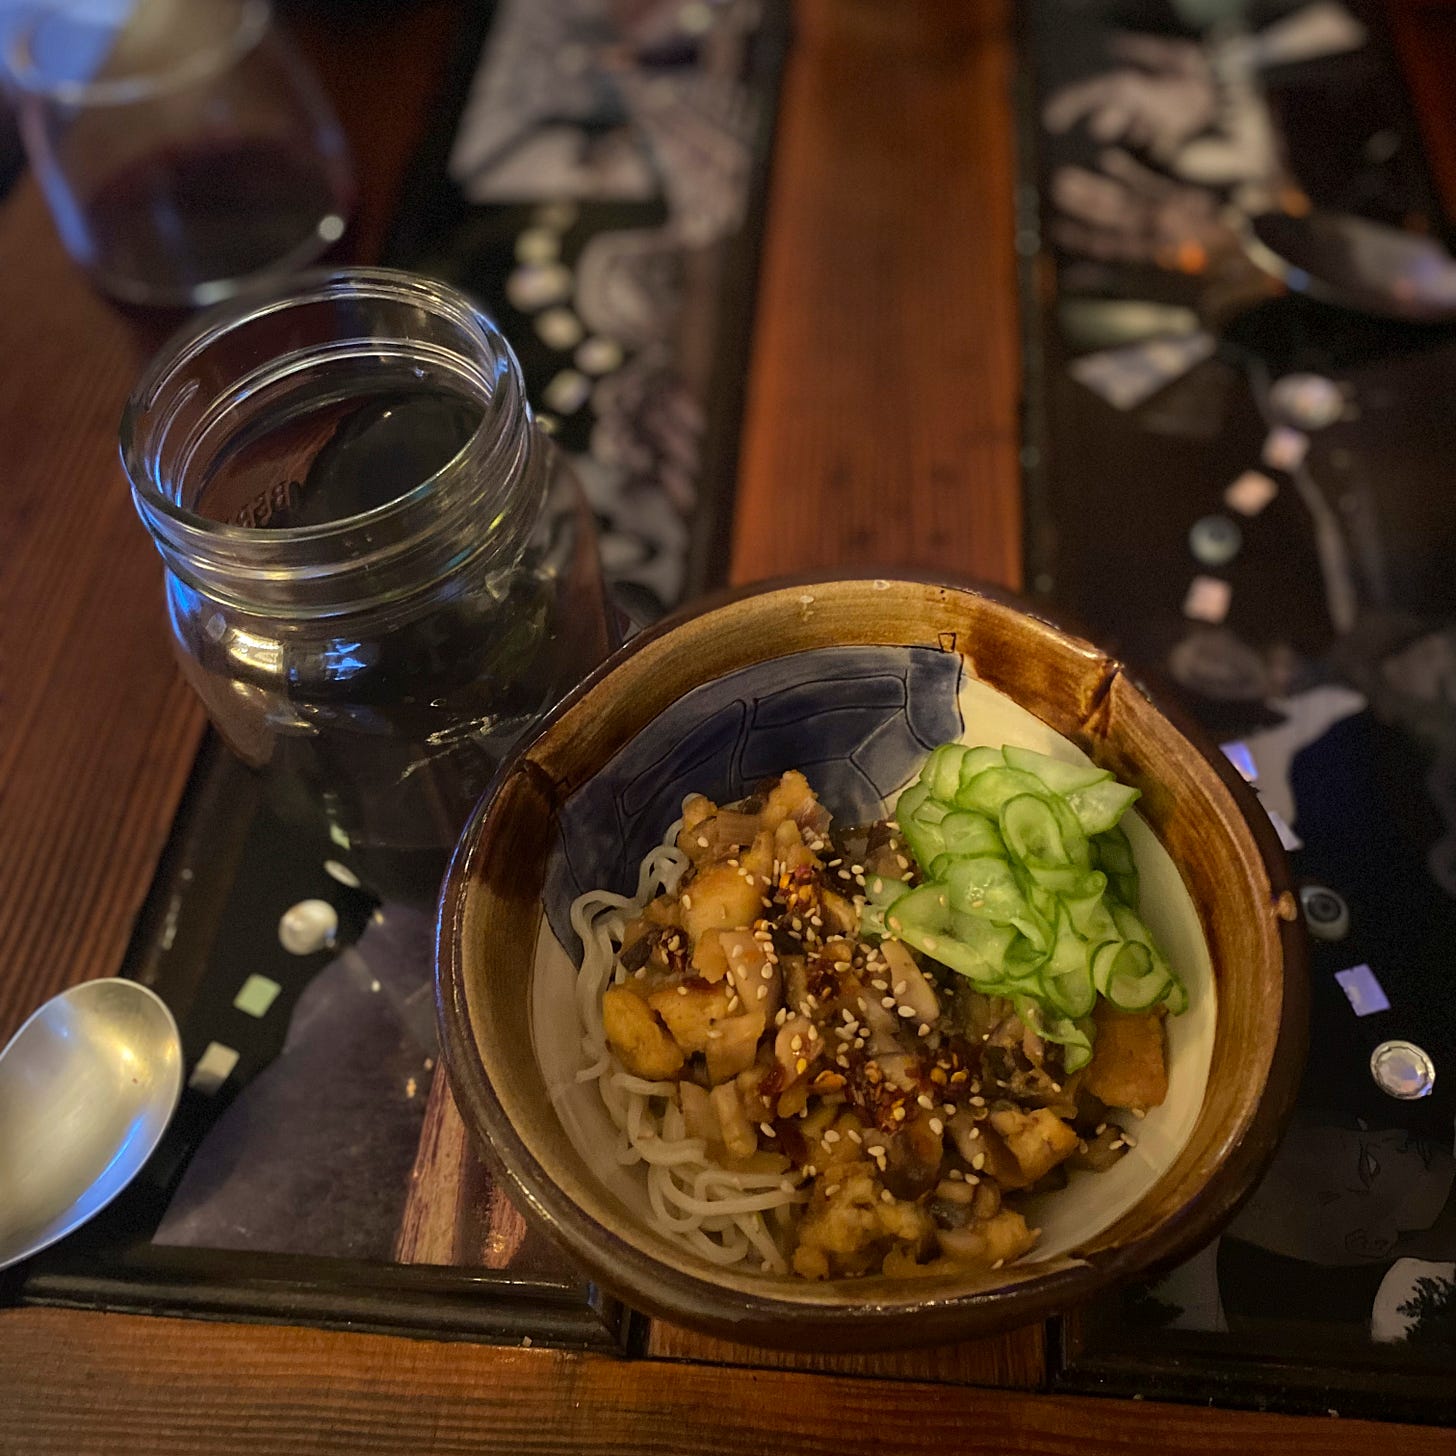 A small bowl of ramen noodles with fried tofu and mushrooms on top, covered in sauce, chili oil, and sesame seeds. A small pile of thinly sliced quick pickles rests at the edge of the bowl. Beside it sits a mason jar of dark beer.